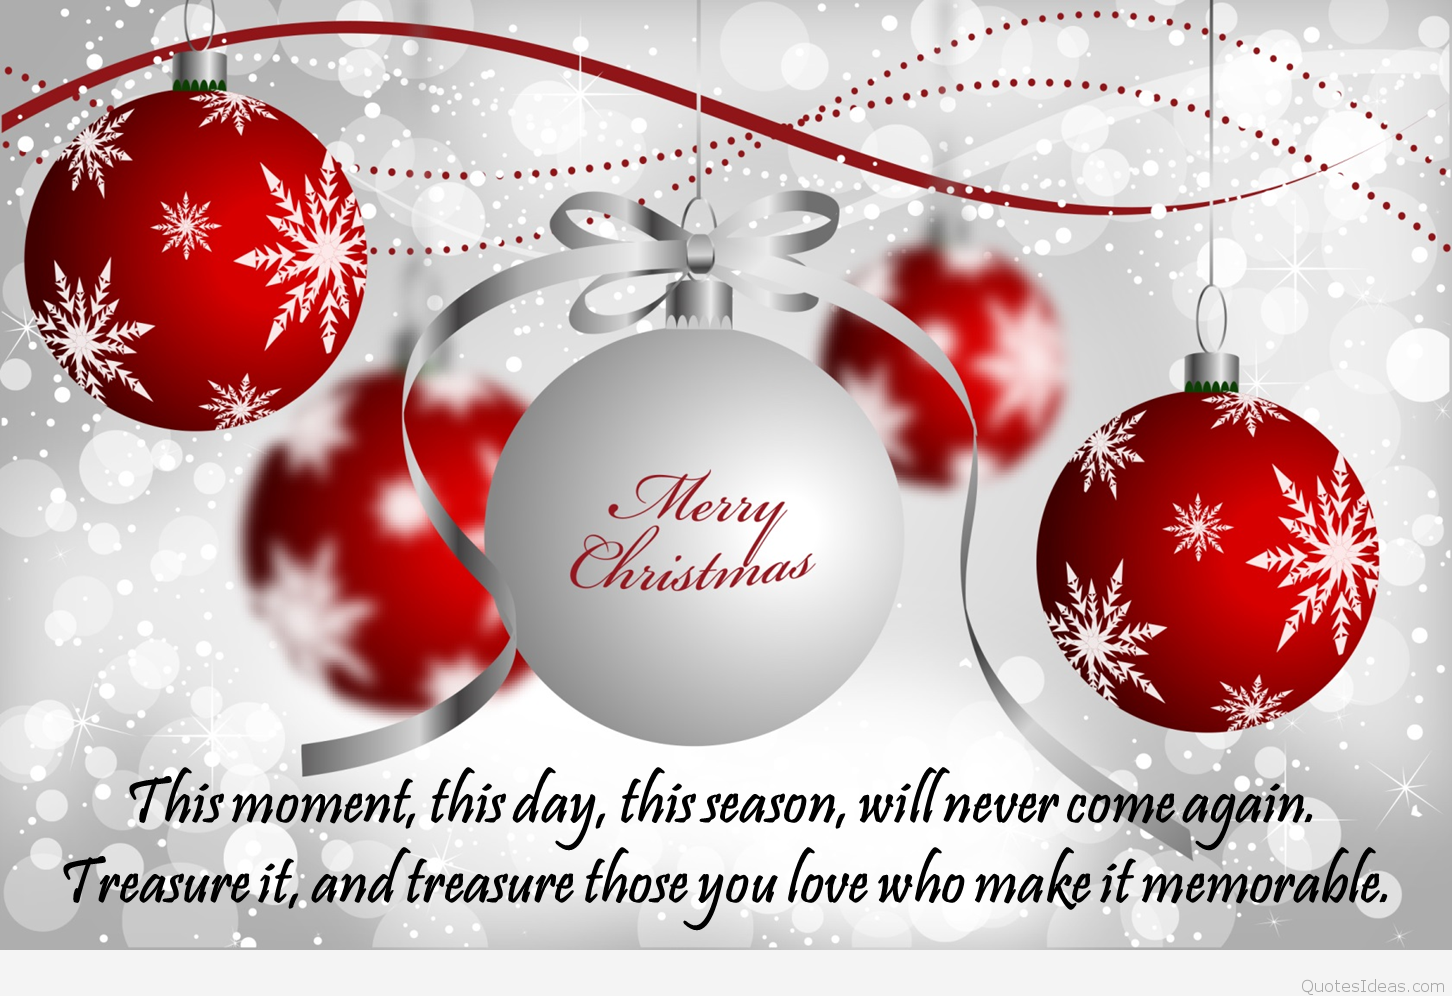 Merry Christmas Quotes Image for Family & Friends